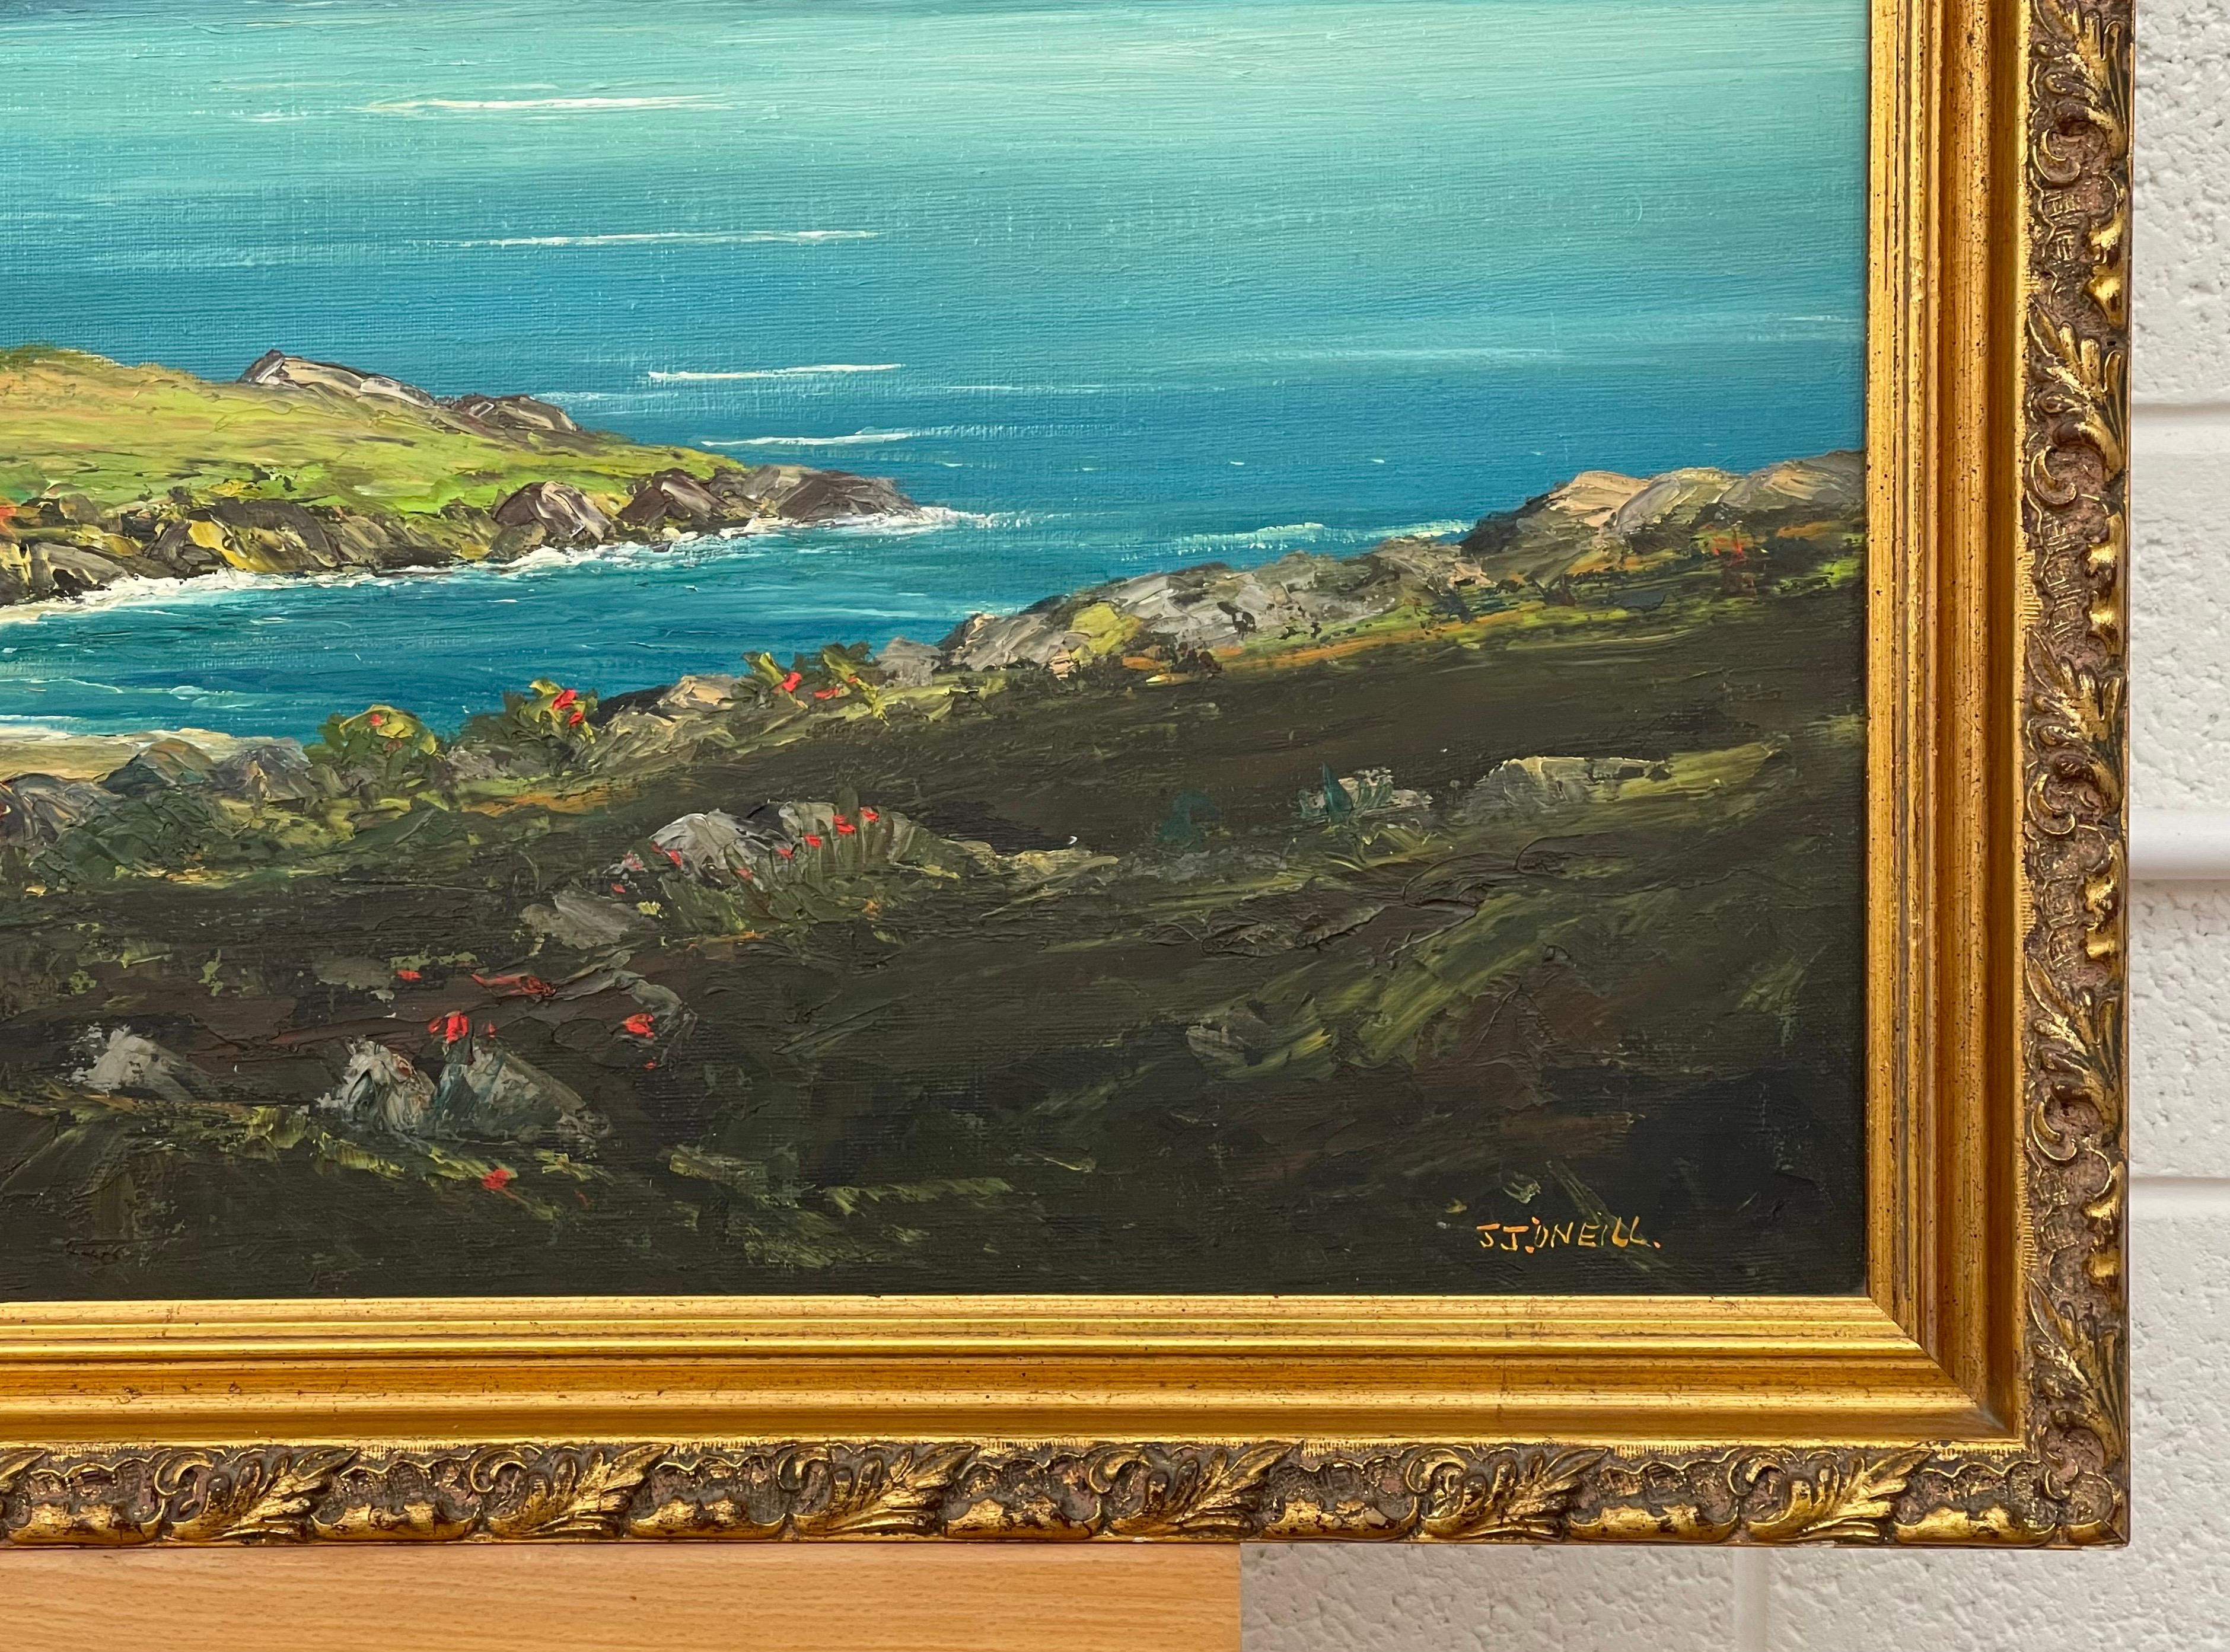 Landscape Painting of Donegal in Northern Ireland by 20th Century Irish Artist - Brown Figurative Painting by J.J. O'Neill